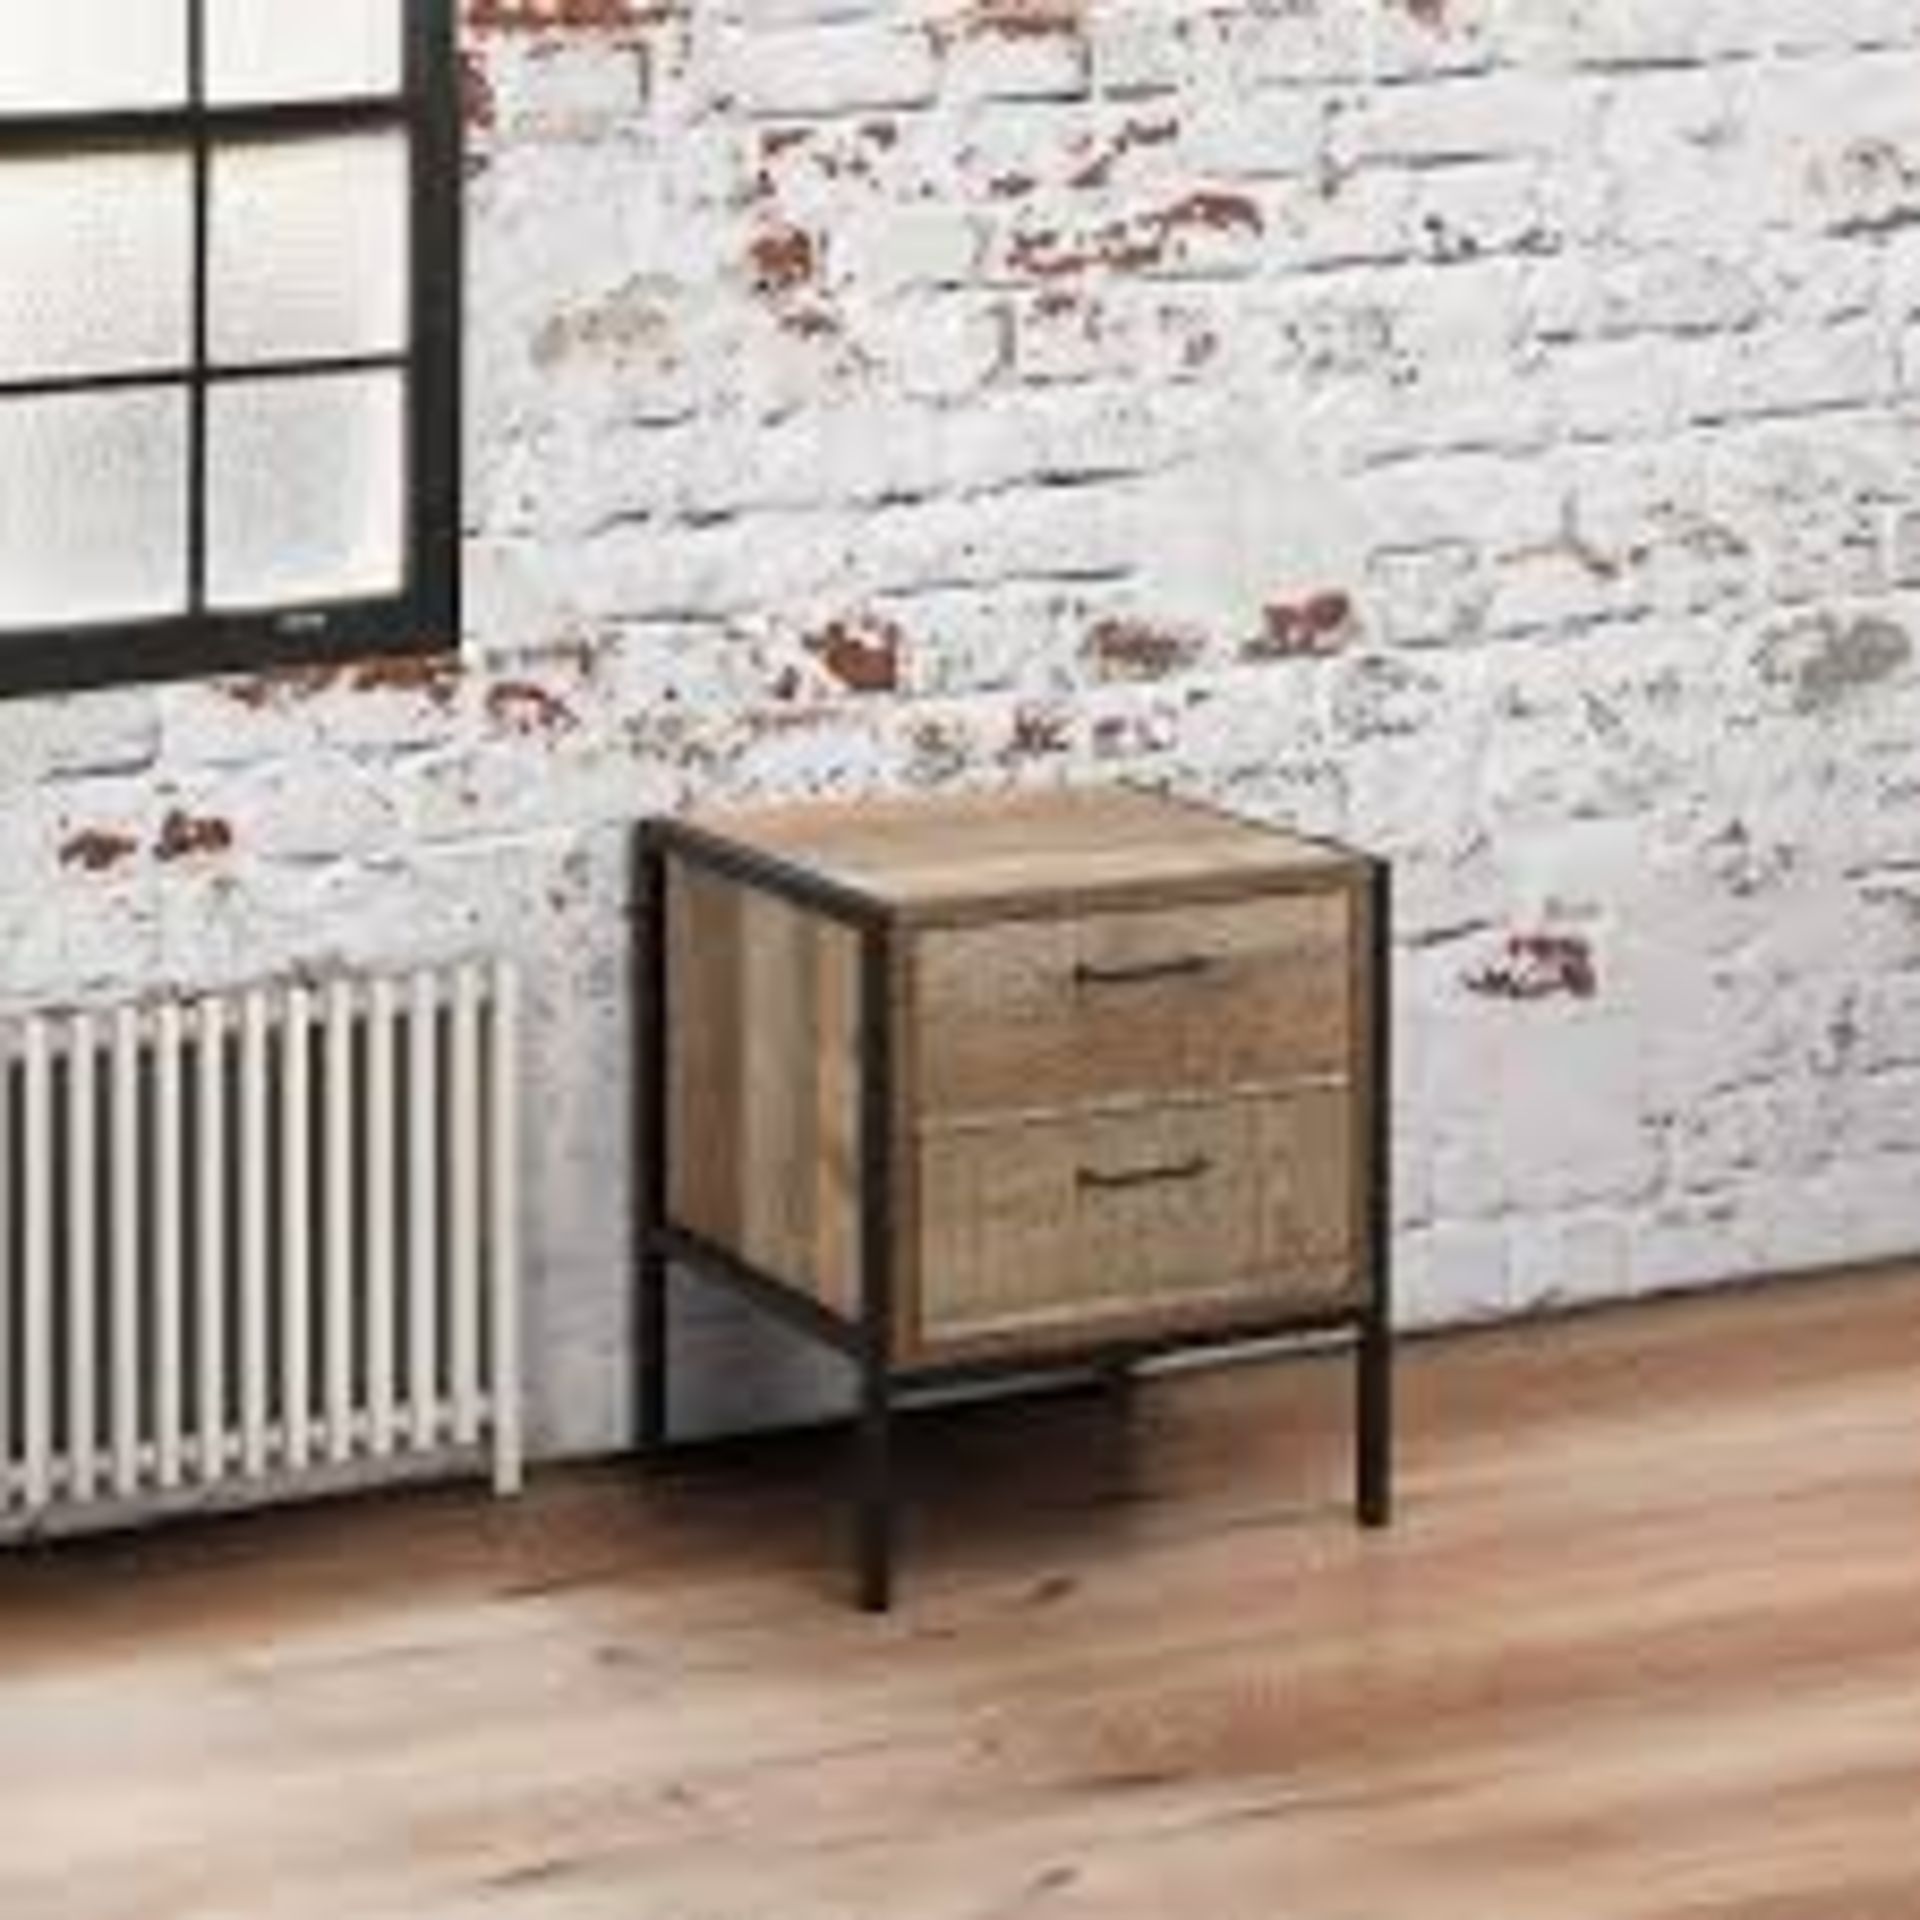 Boxed Urban 2 Drawer Bedside Rustic Cabinet RRP £80 (19138) (Pictures Are For Illustration